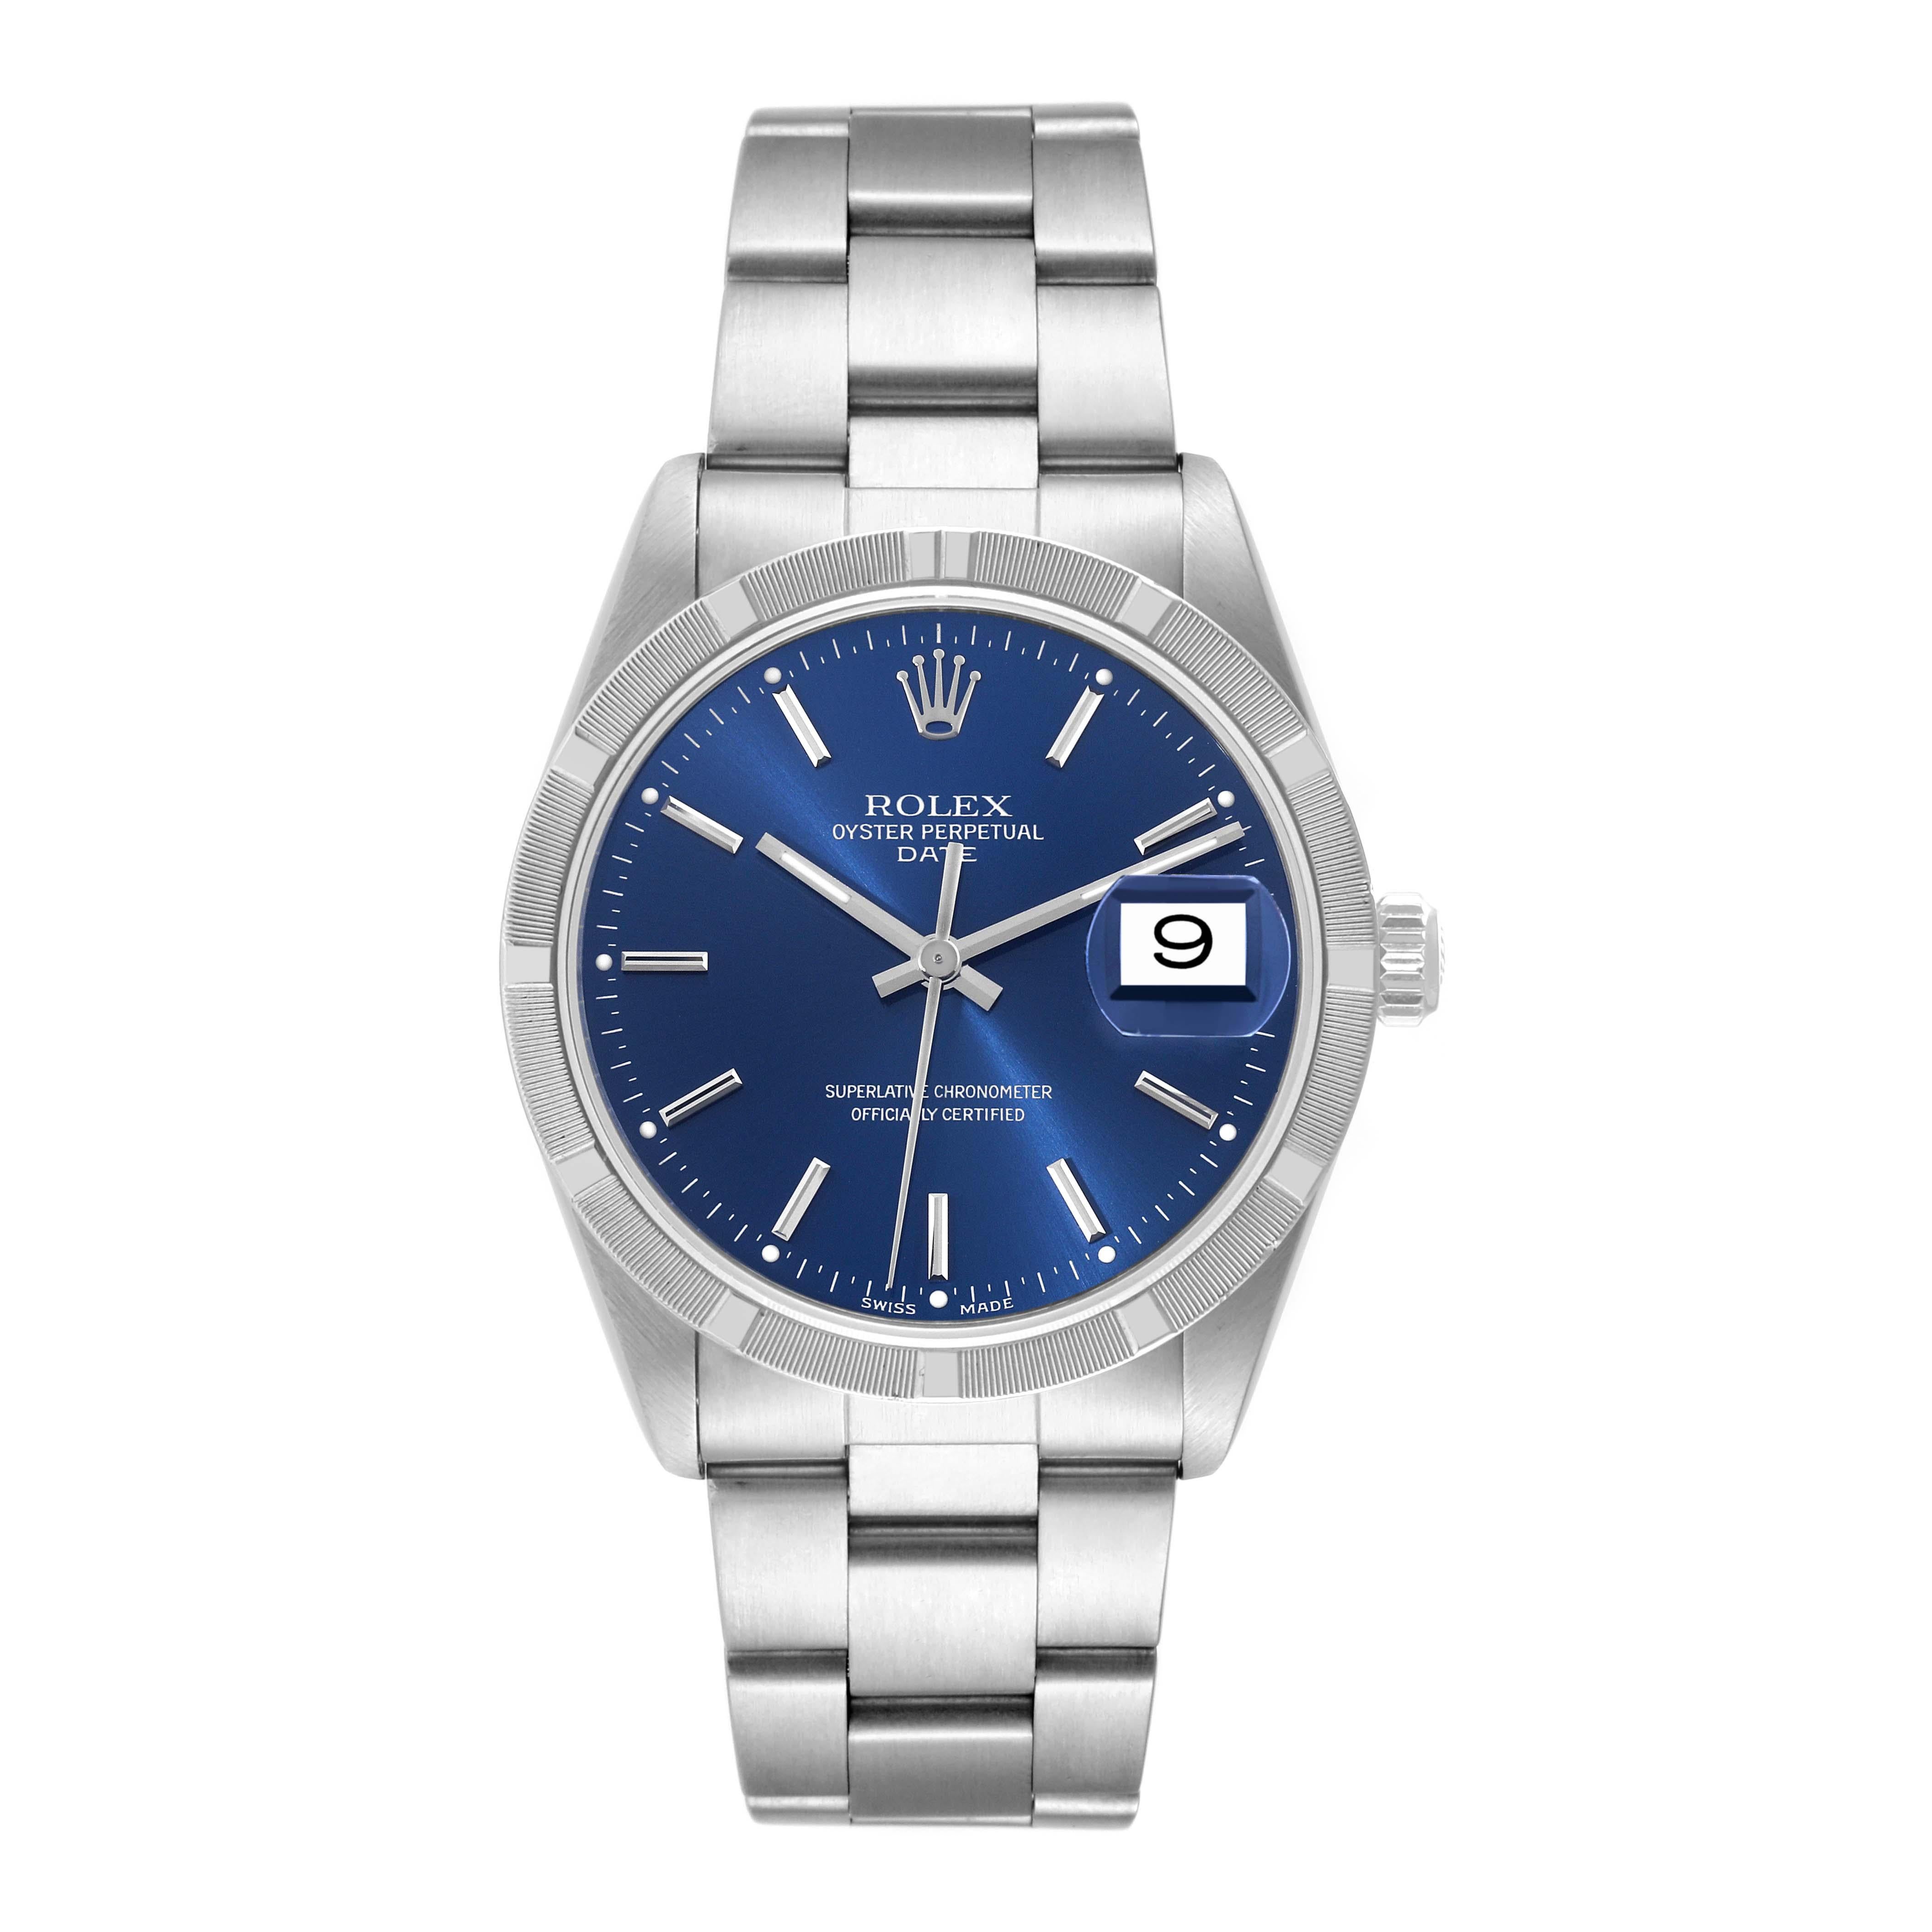 Rolex Date Blue Dial Engine Turned Bezel Steel Mens Watch 15210. Officially certified chronometer self-winding movement. Stainless steel oyster case 34 mm in diameter. Rolex logo on a crown. Stainless steel engine turned bezel. Scratch resistant